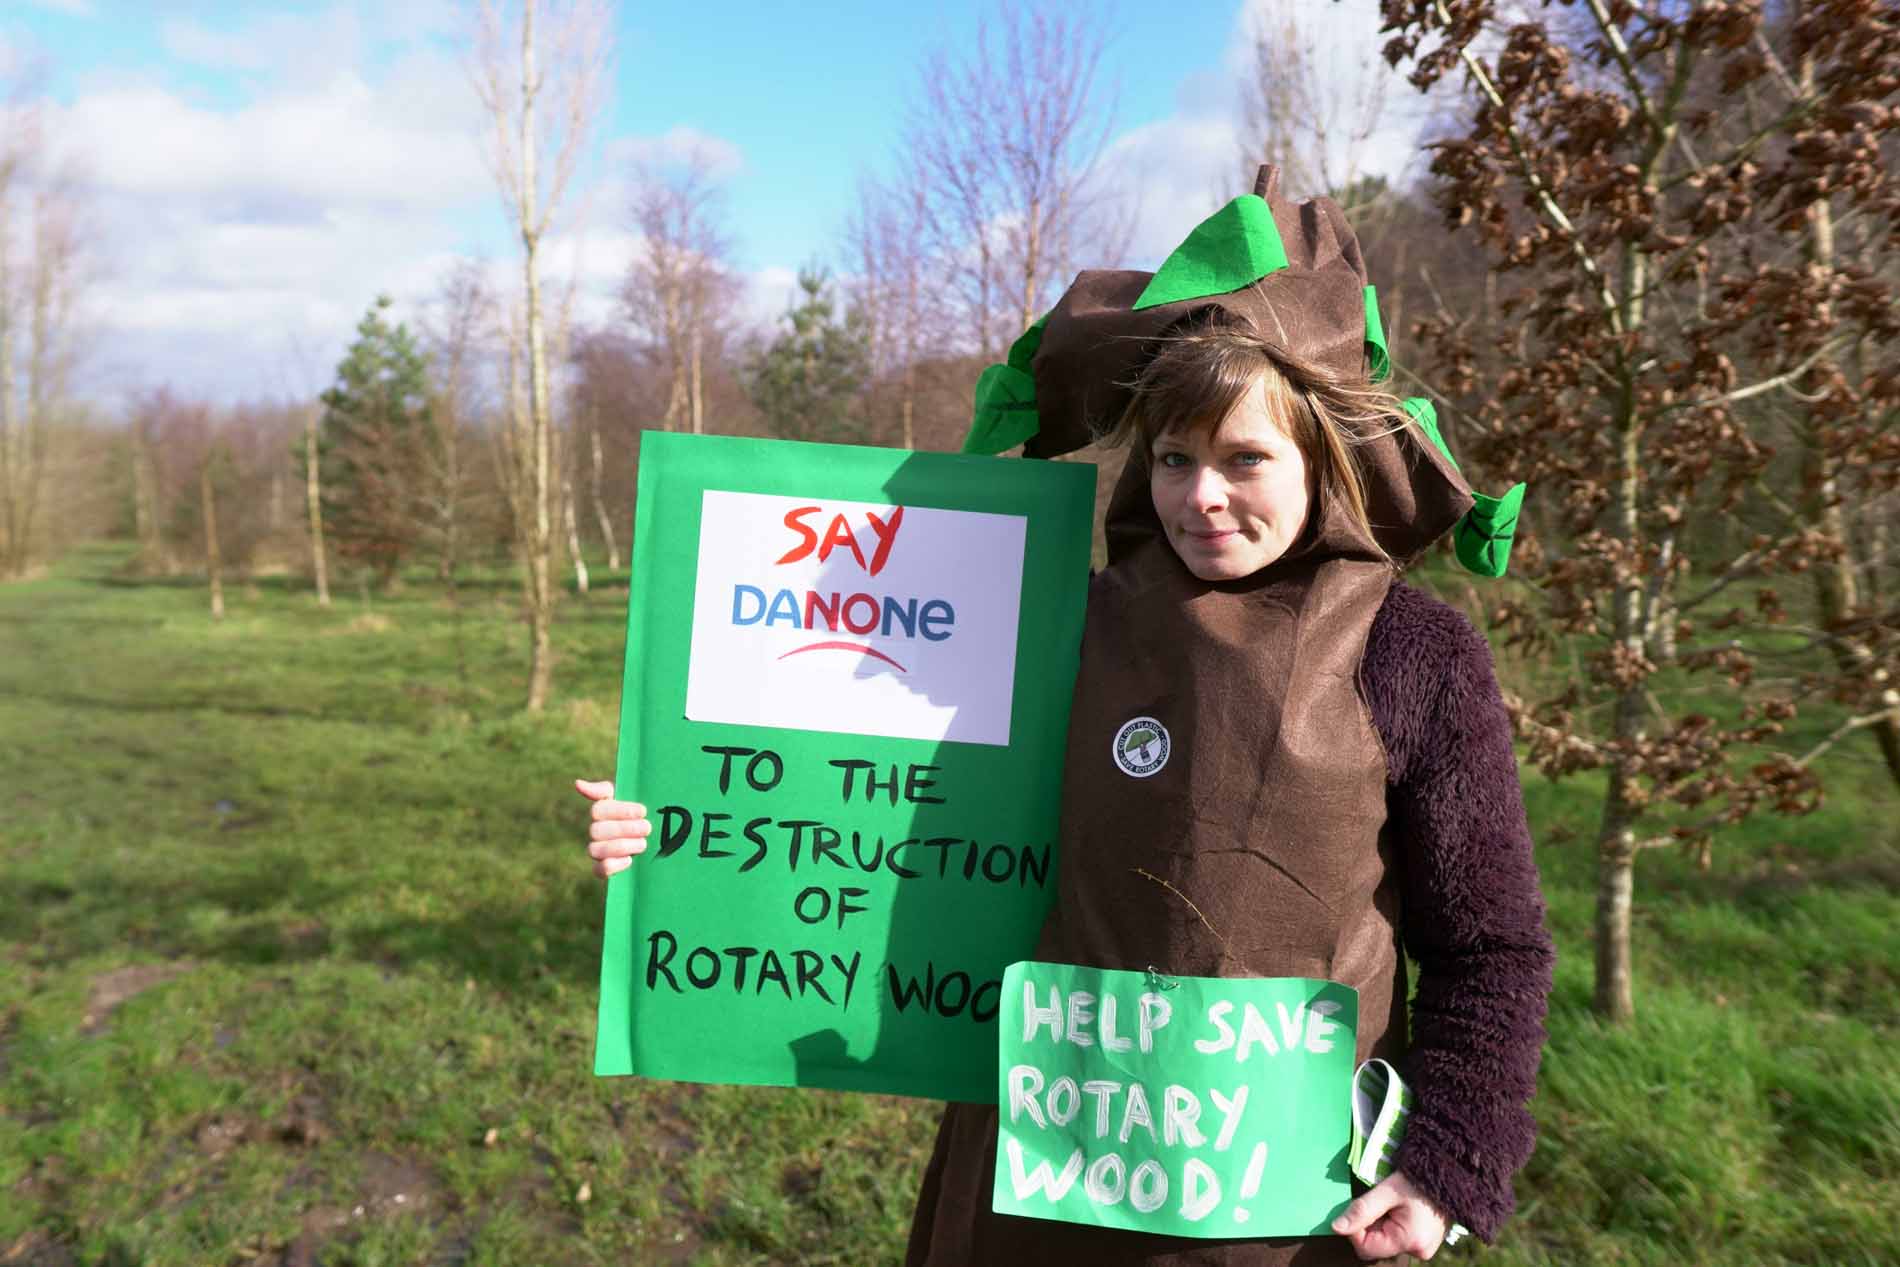 Harrogate Green Party rotary woods